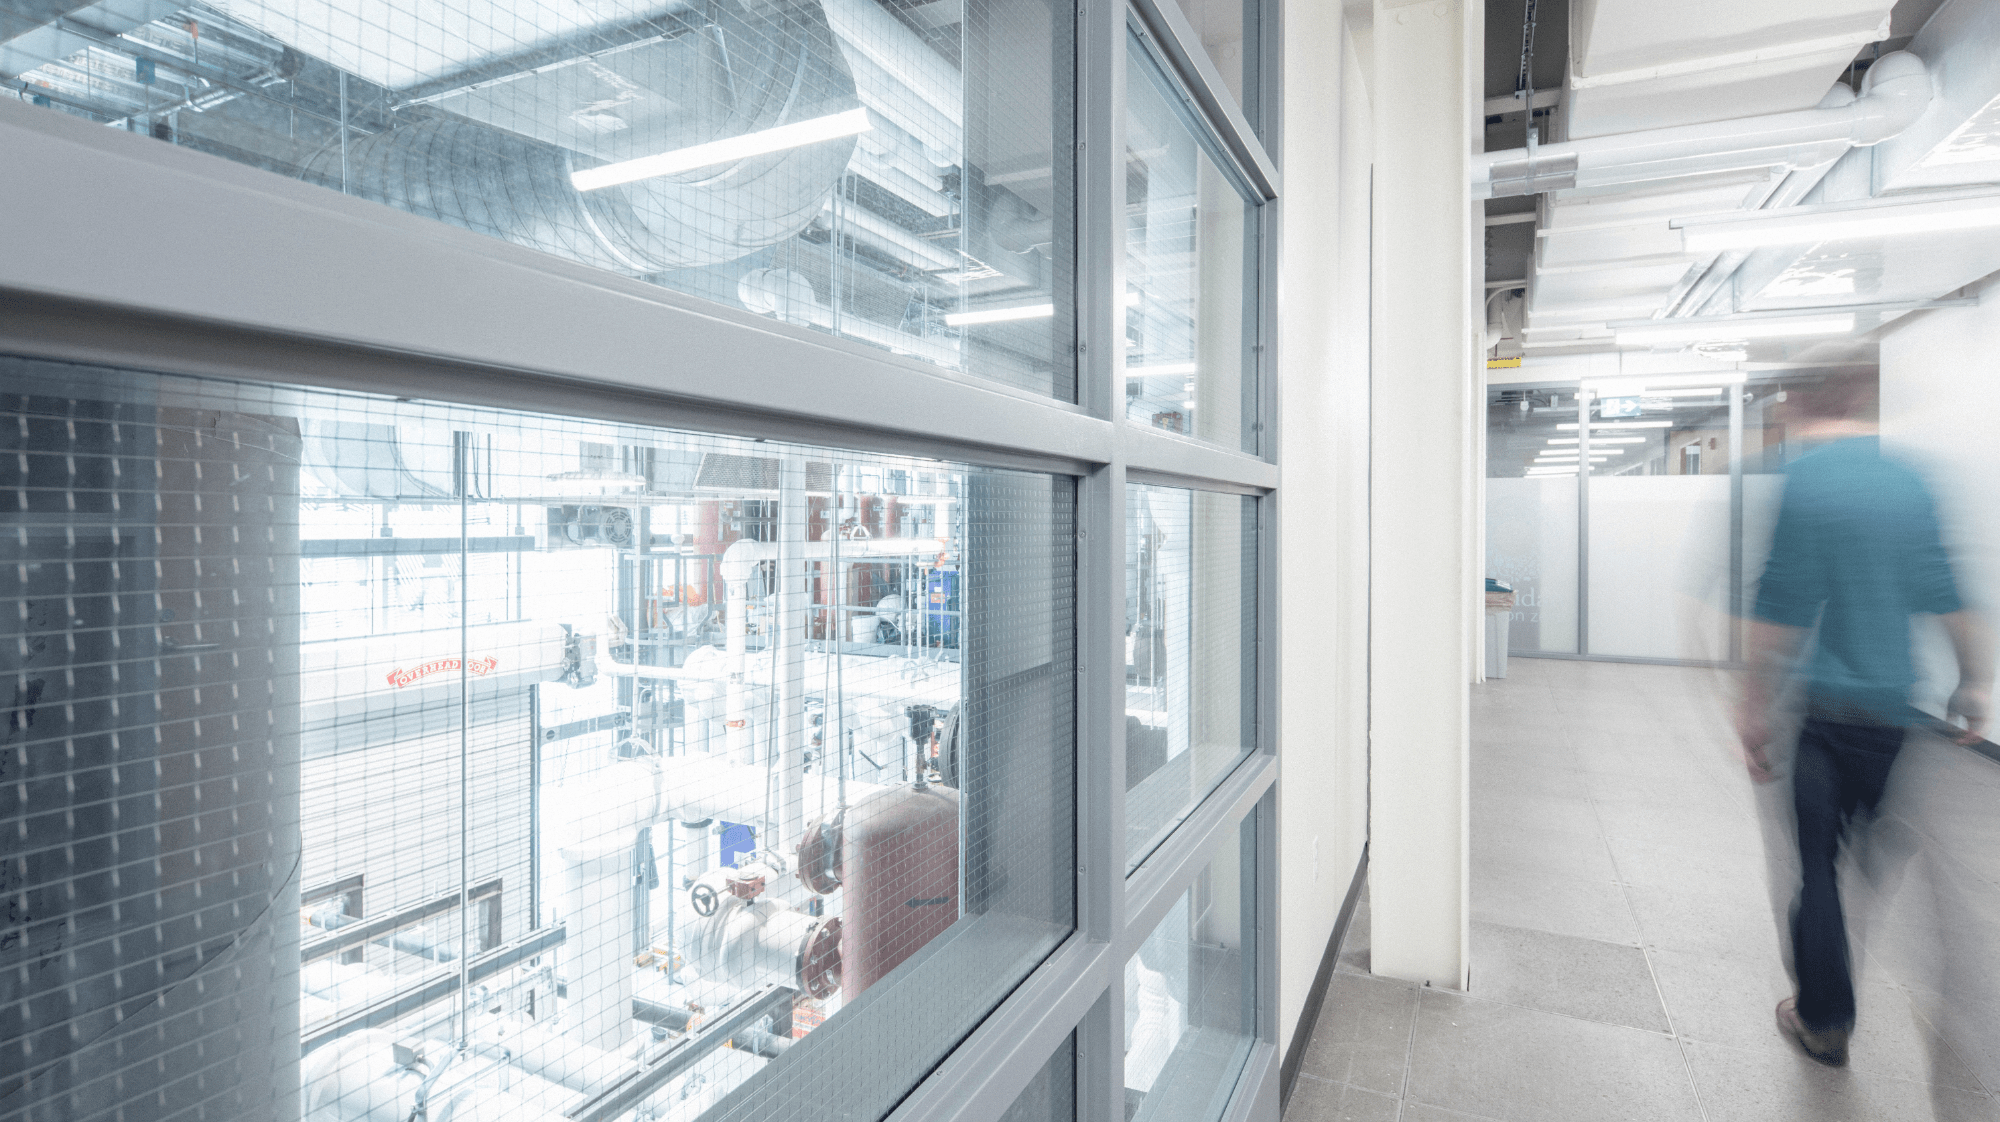 A hallway at Sheridan's Skilled Trades Centre with windows overlooking a workshop below.